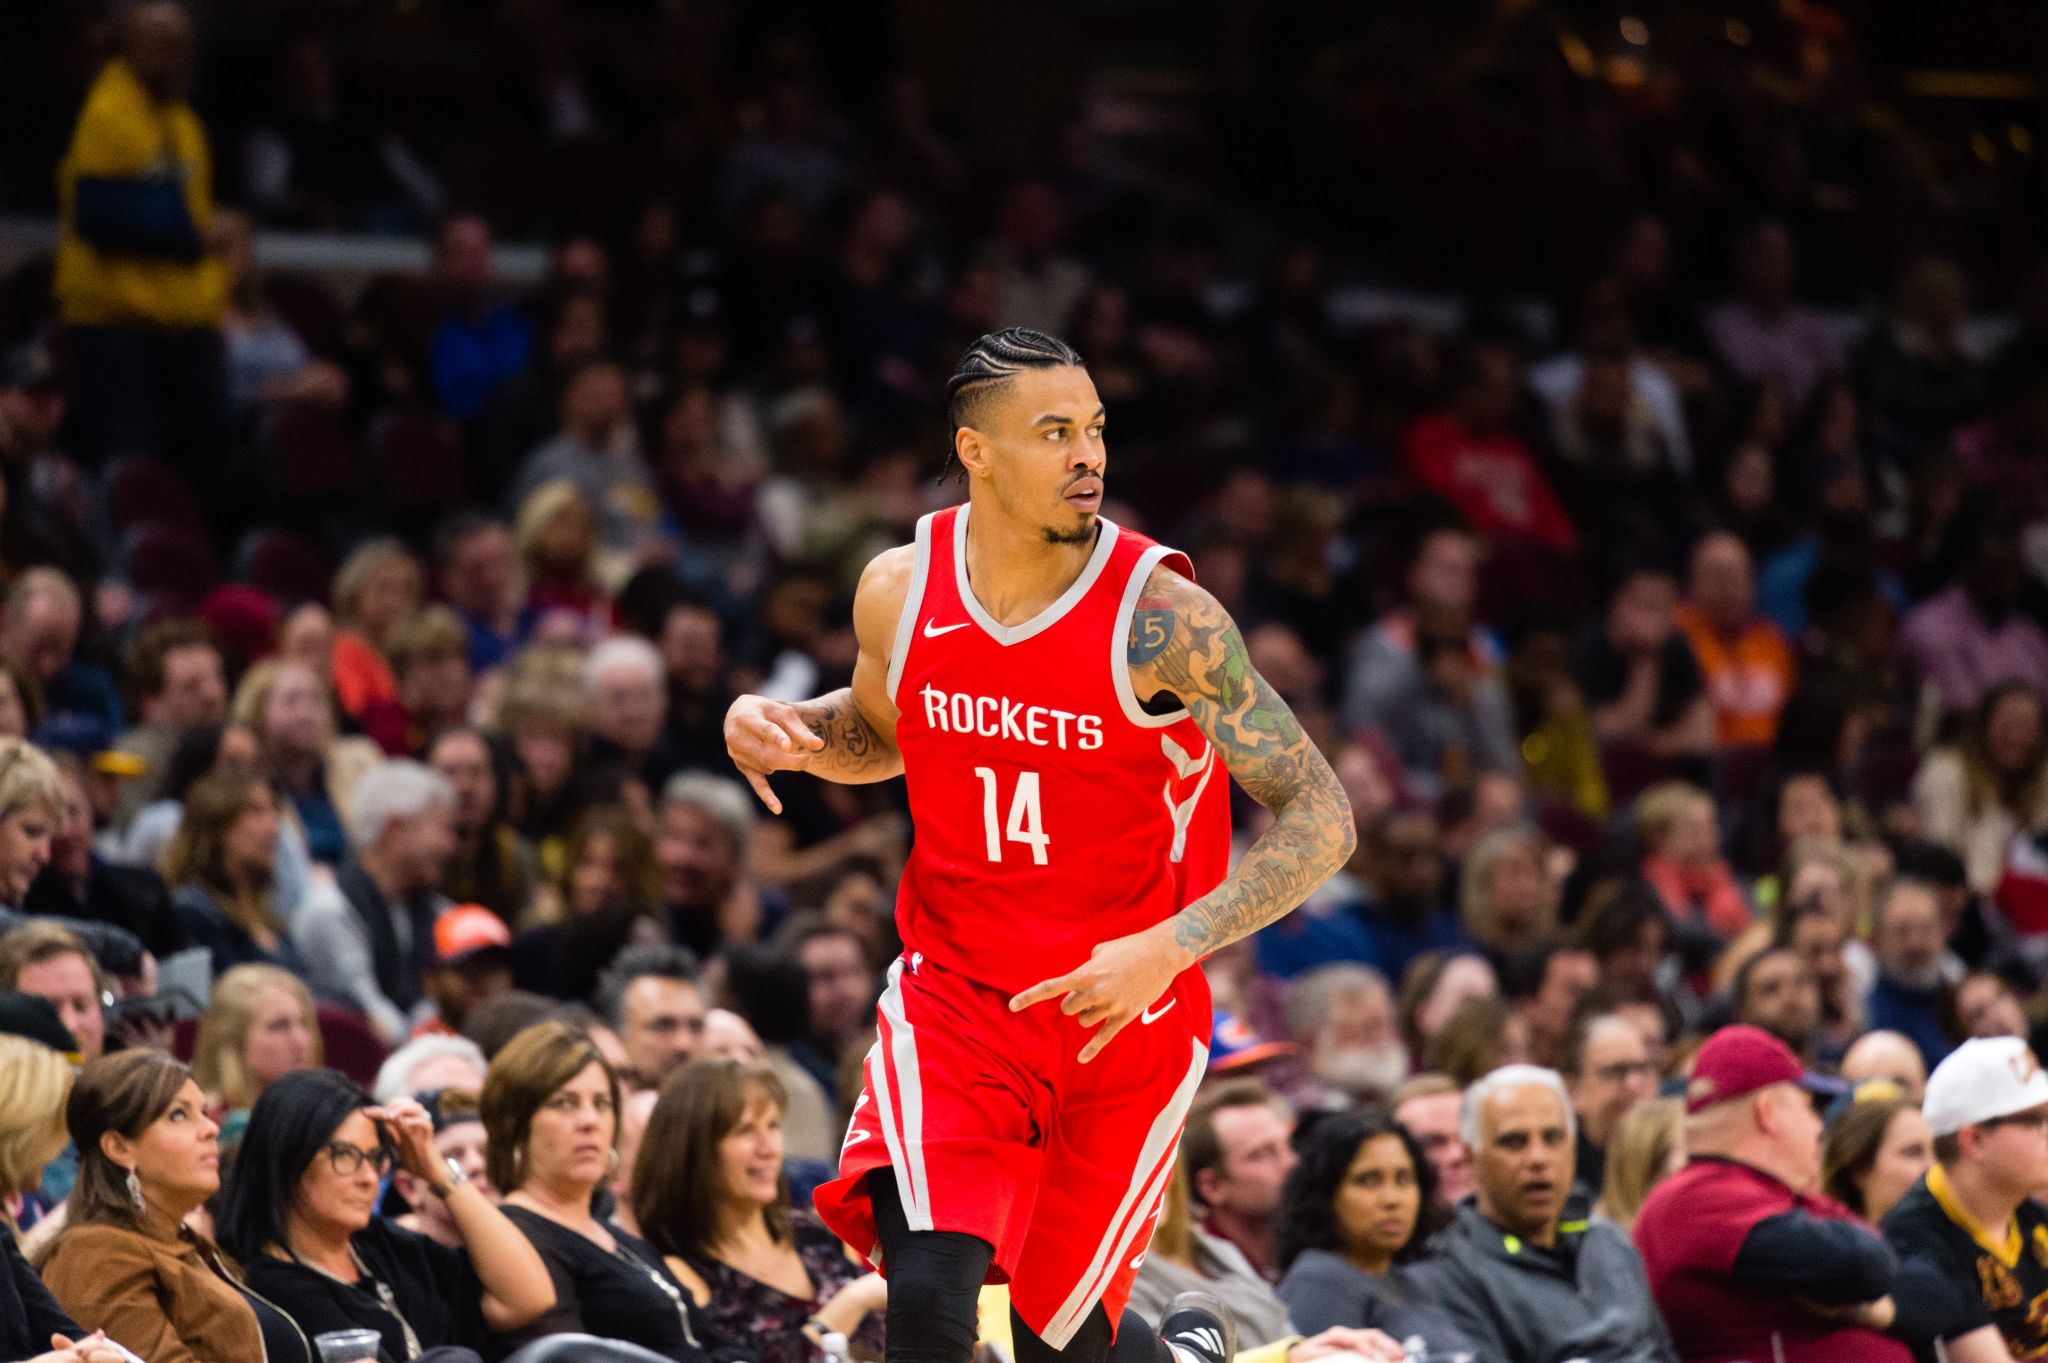 Rockets fan favorite Gerald Green reps Astros with sweet throwback